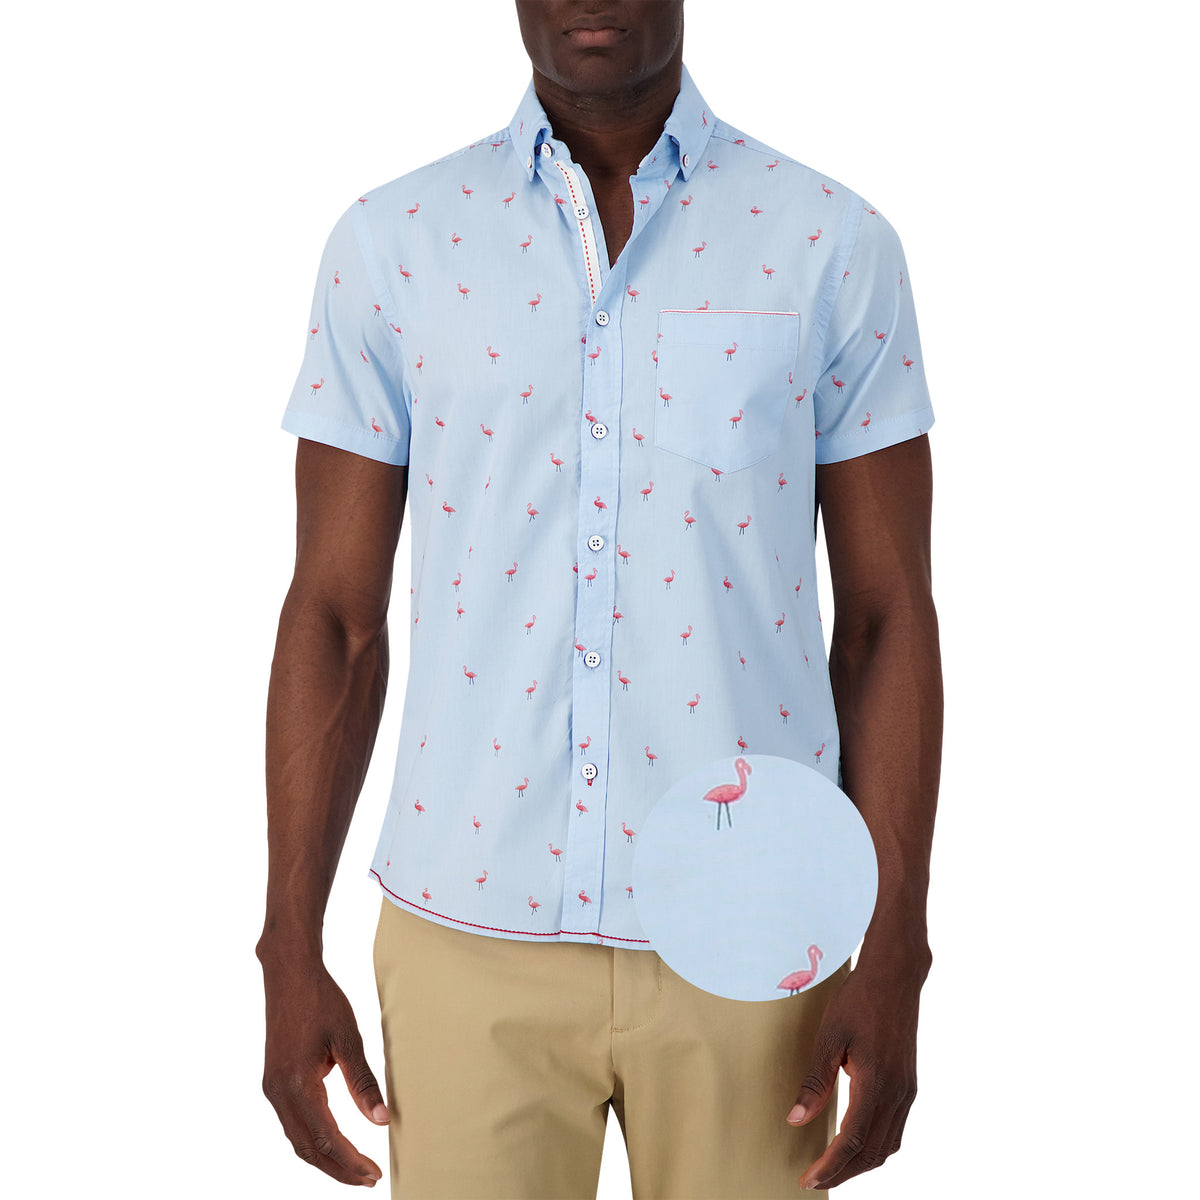 Model Front View of Short Sleeve Shirt with Flamingo Print in Blue with magnified view of material and print